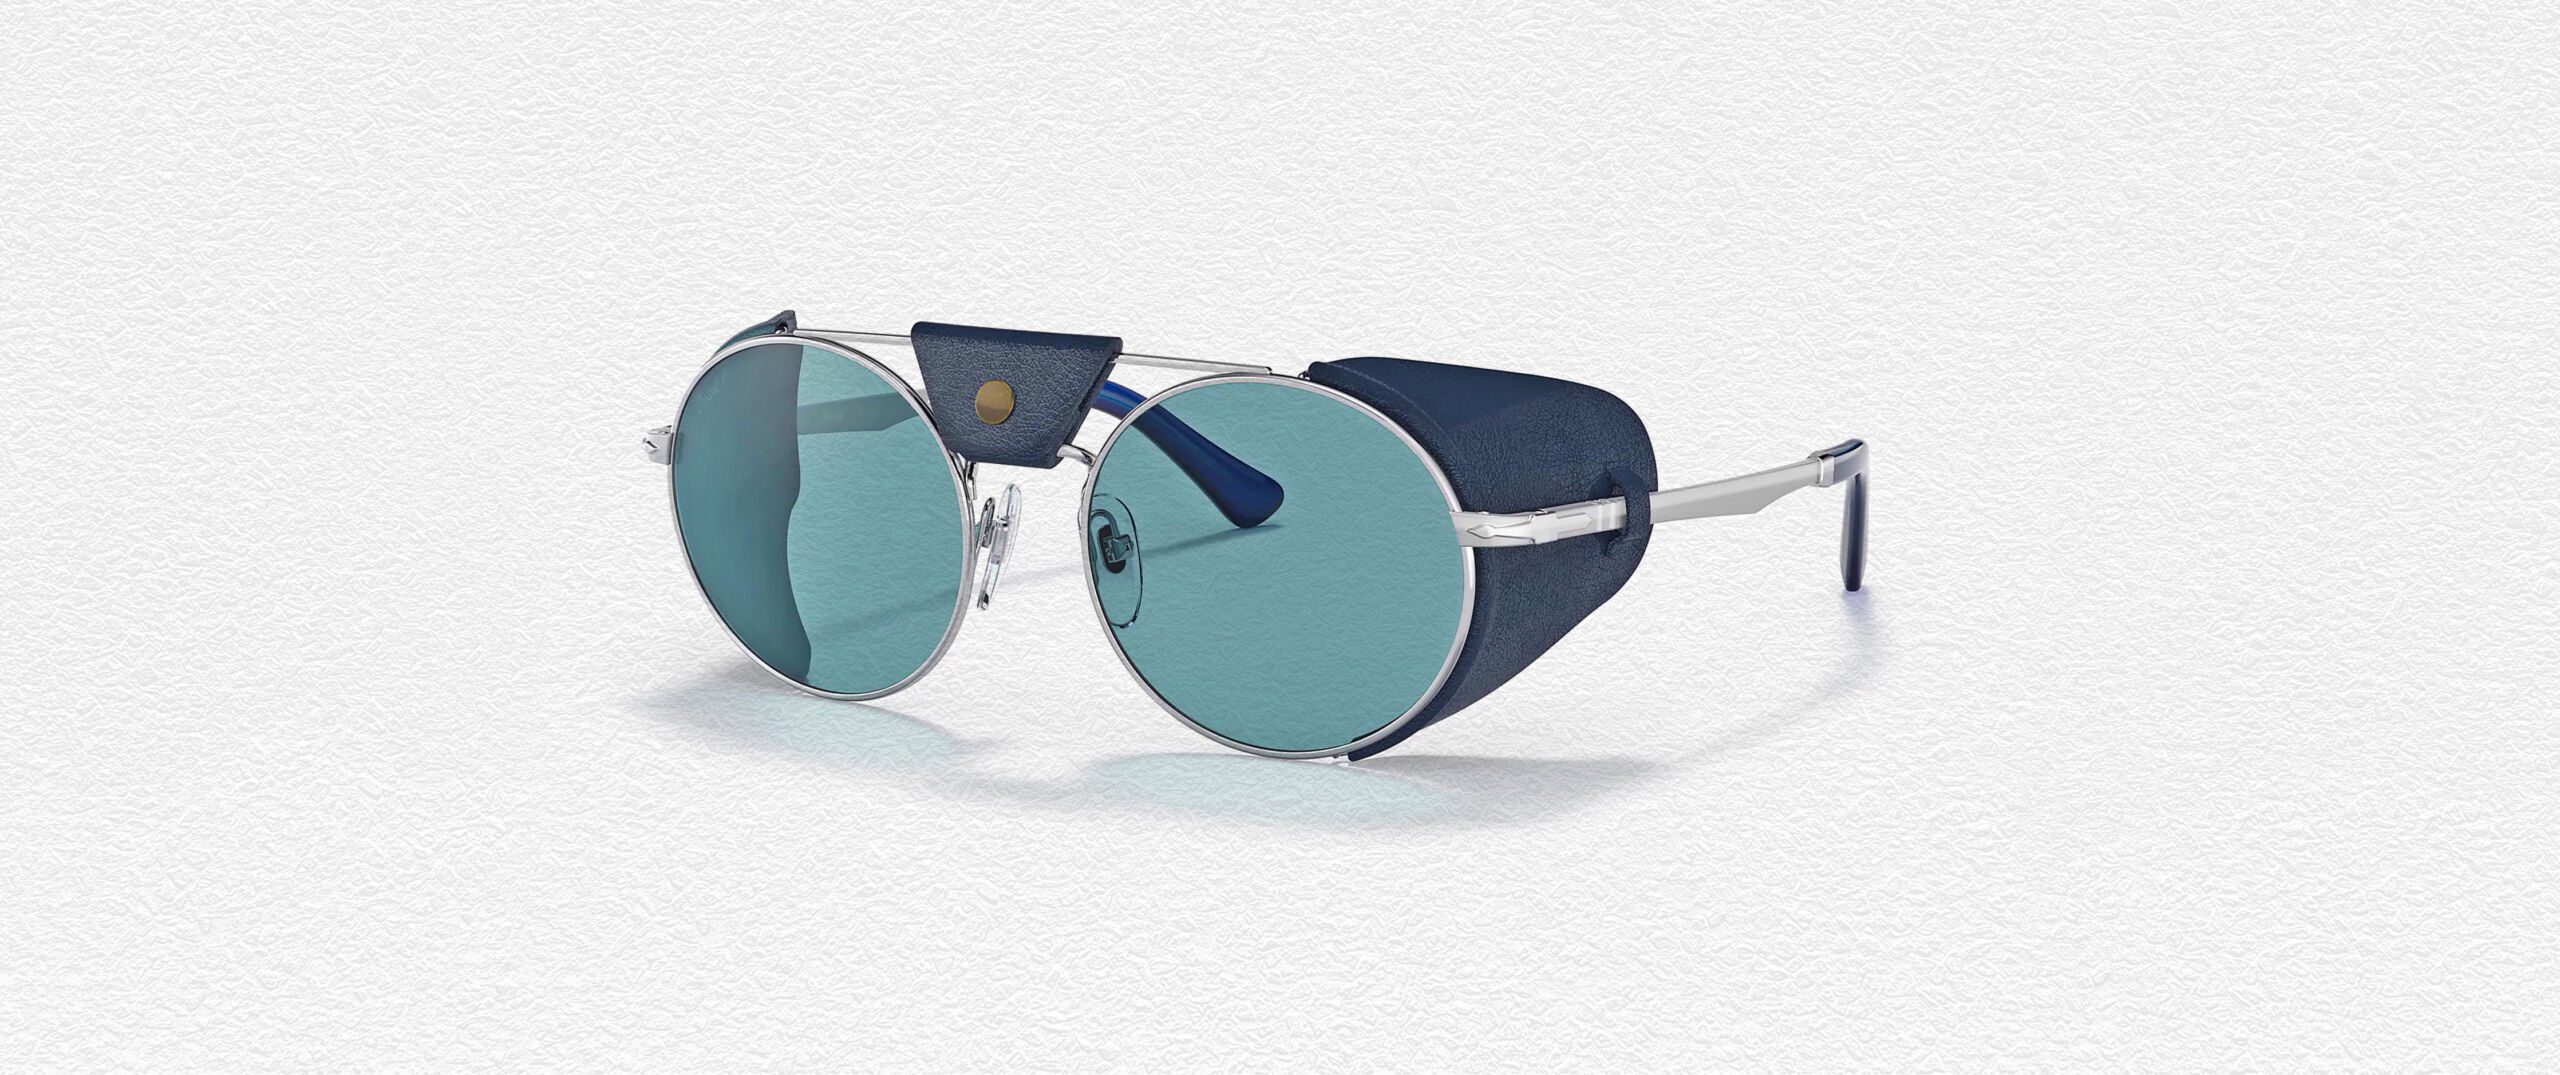 Picks: and Editor\'s | Mercedes‑Maybach Sunglasses, Port Journal Gentleman\'s Persol Taylor\'s